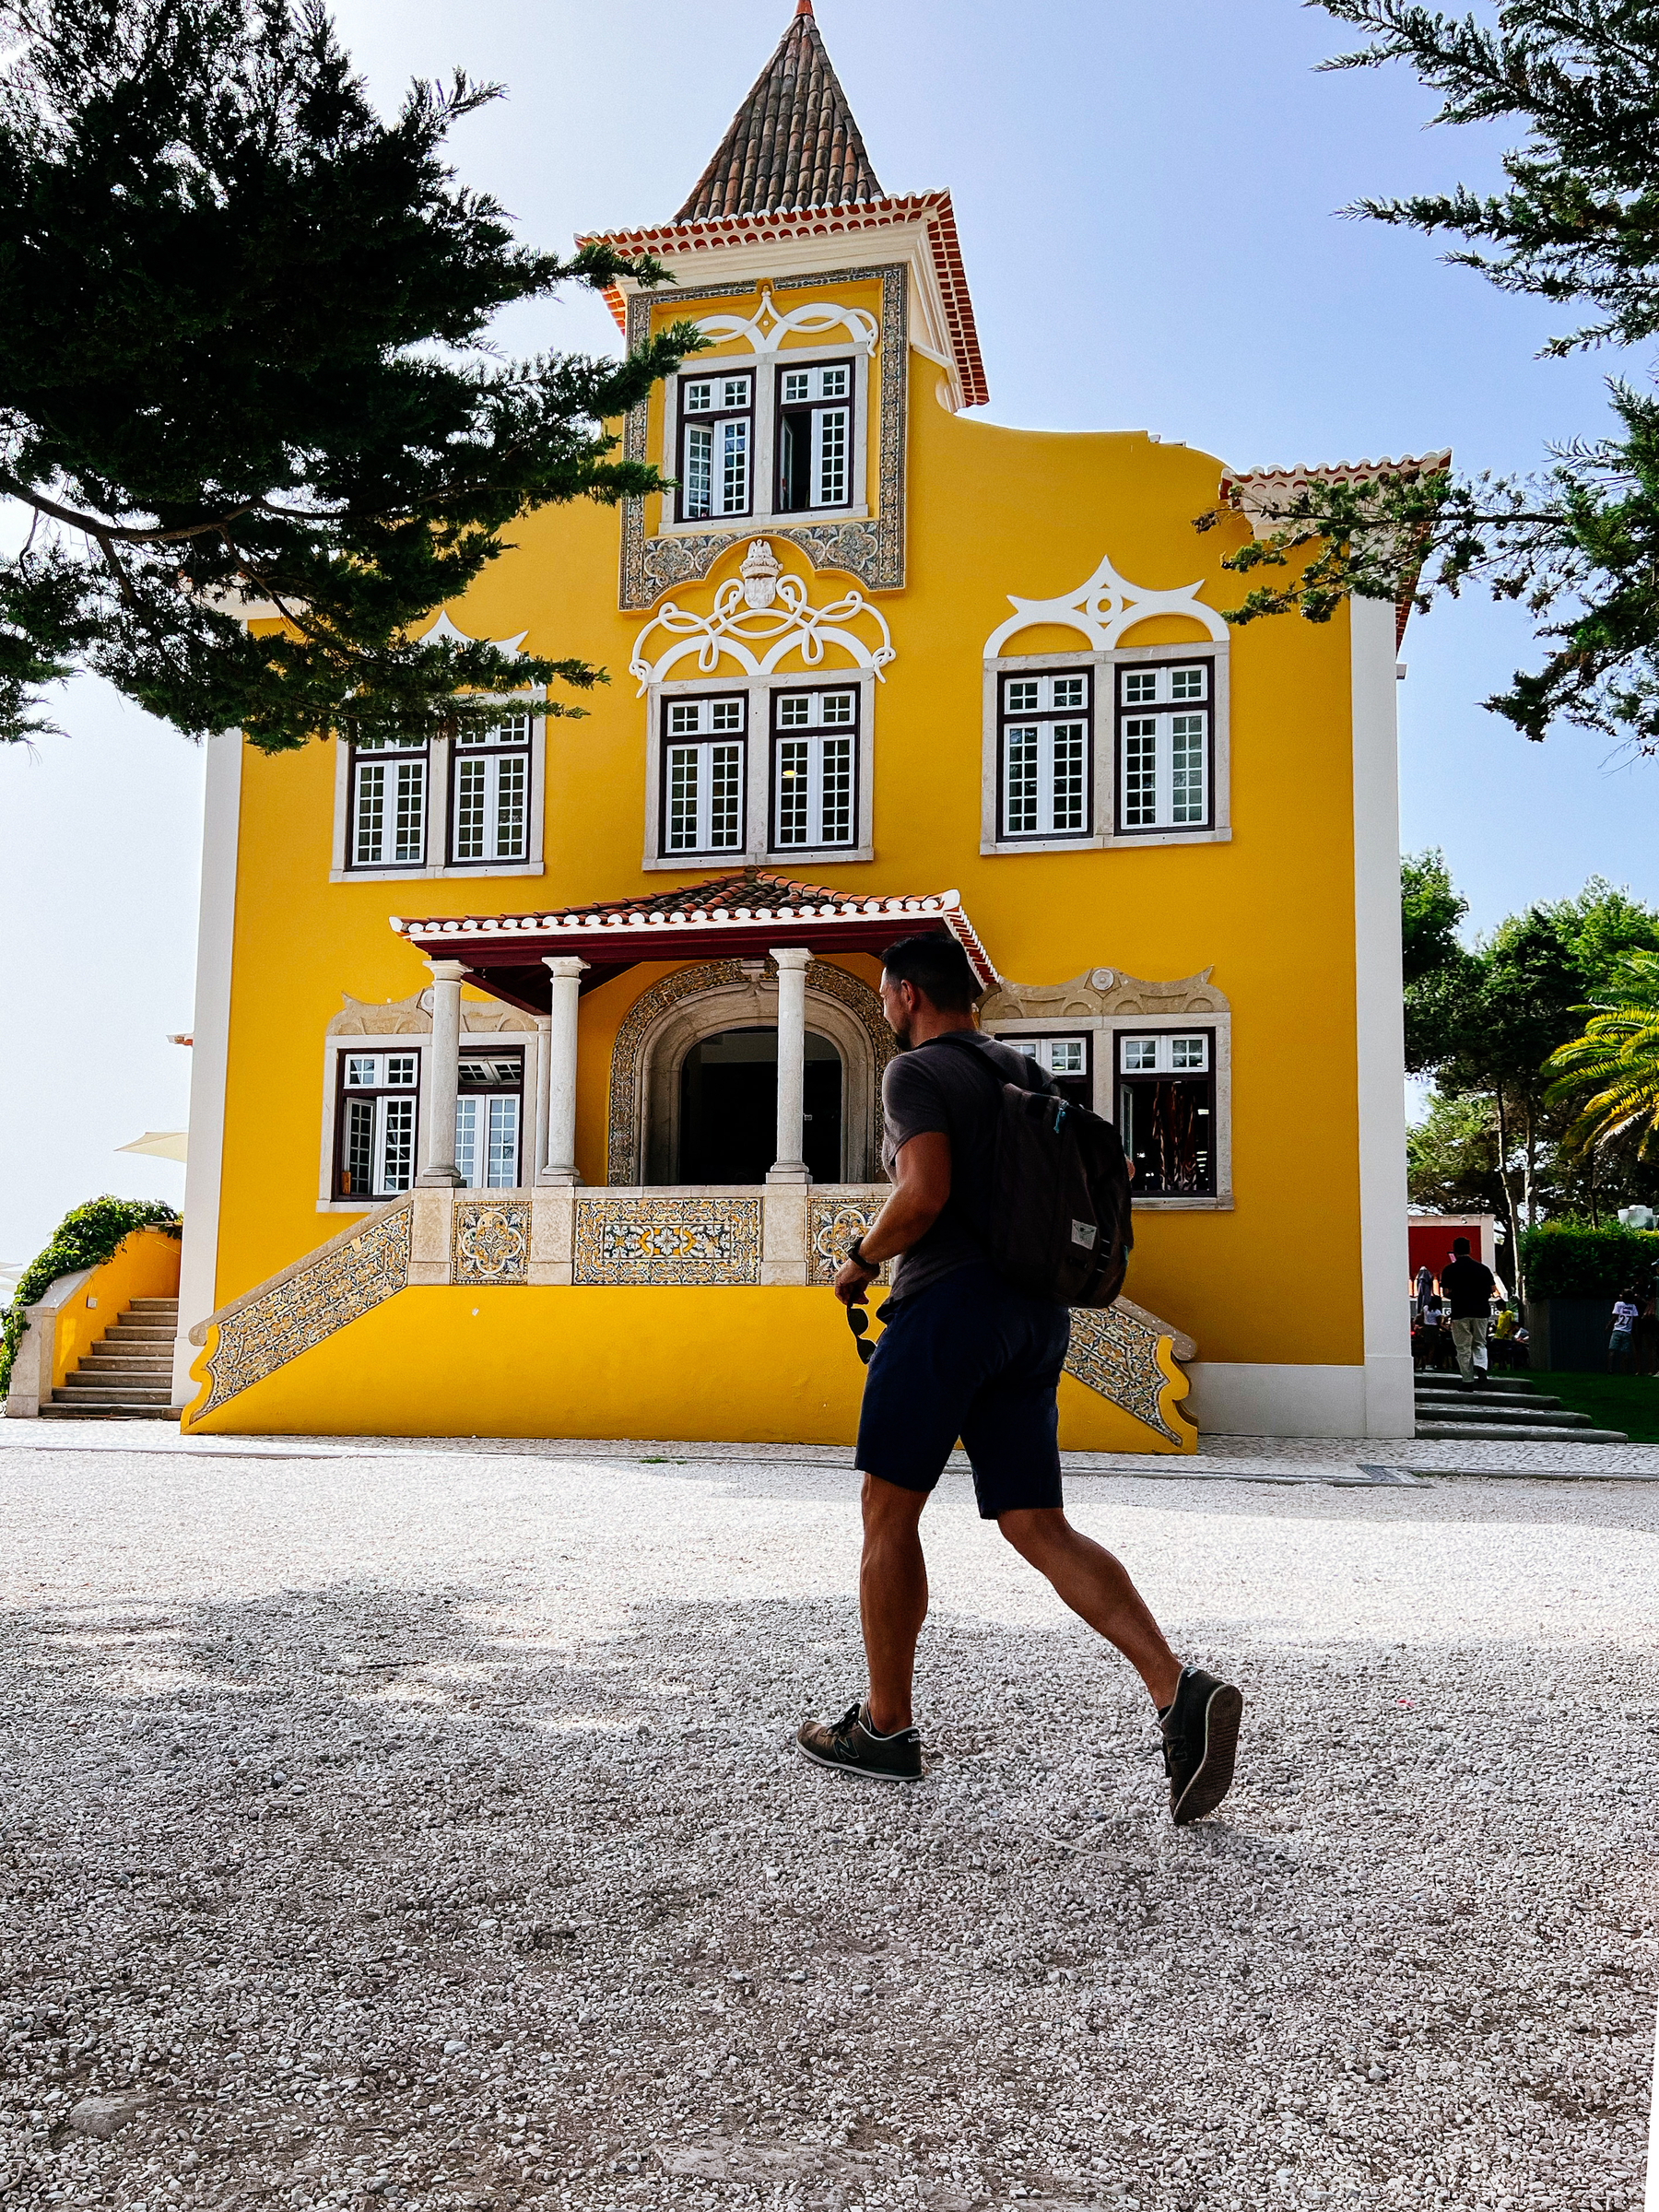 A man walks in front of a cool looking yellow building, palatial 